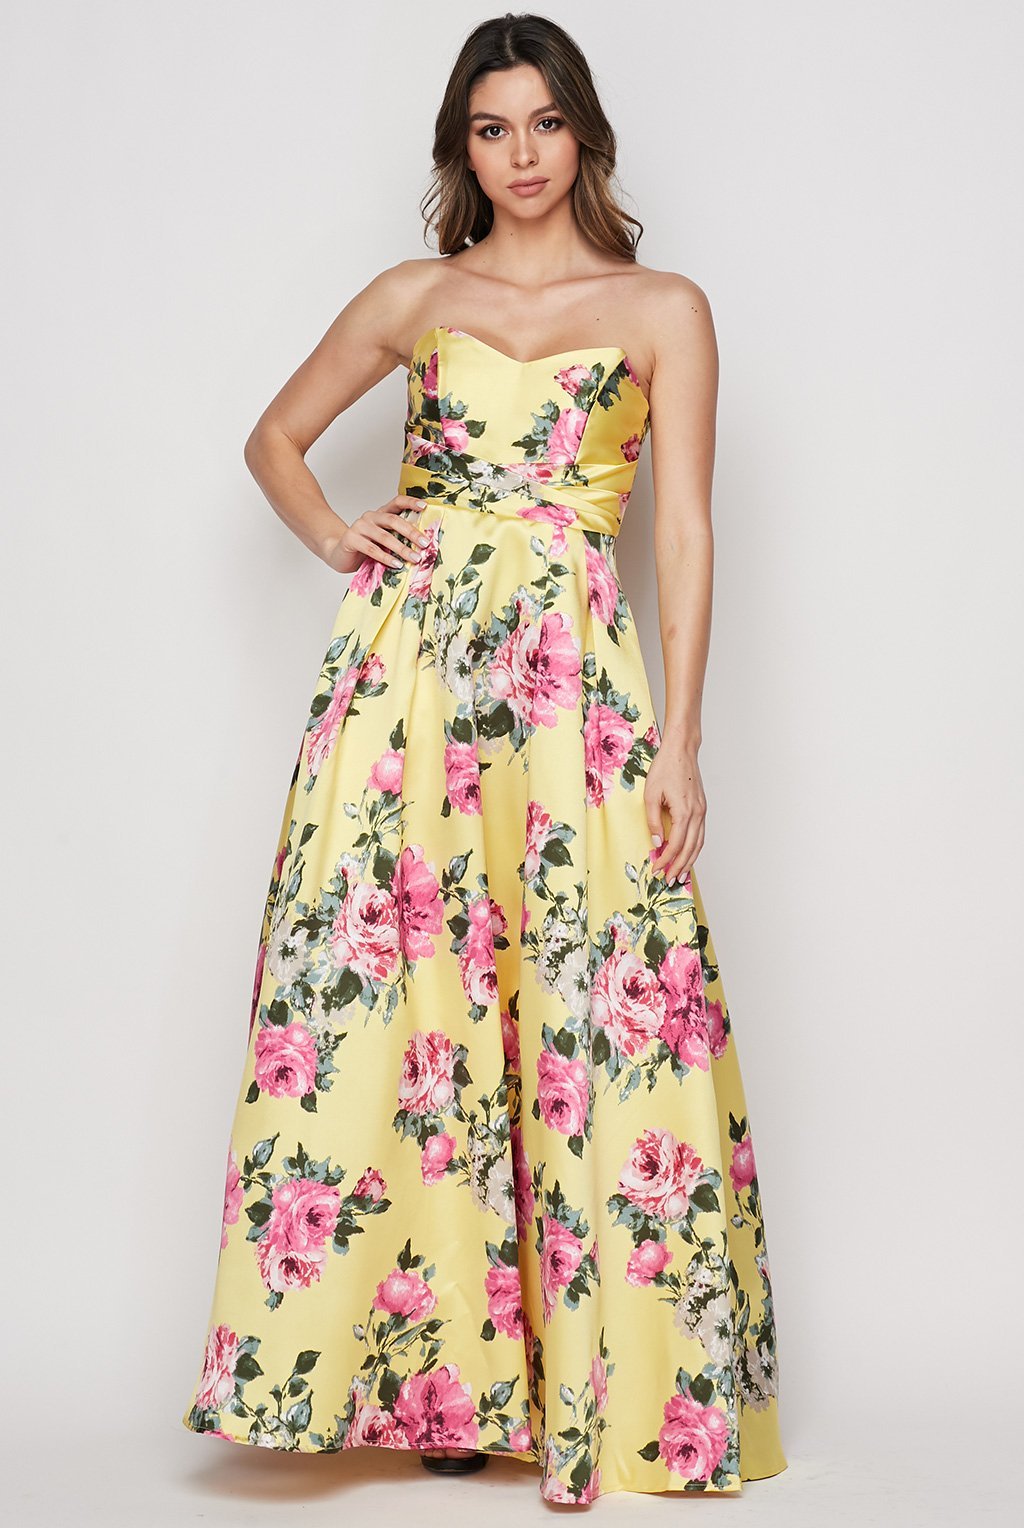 yellow and pink floral dress